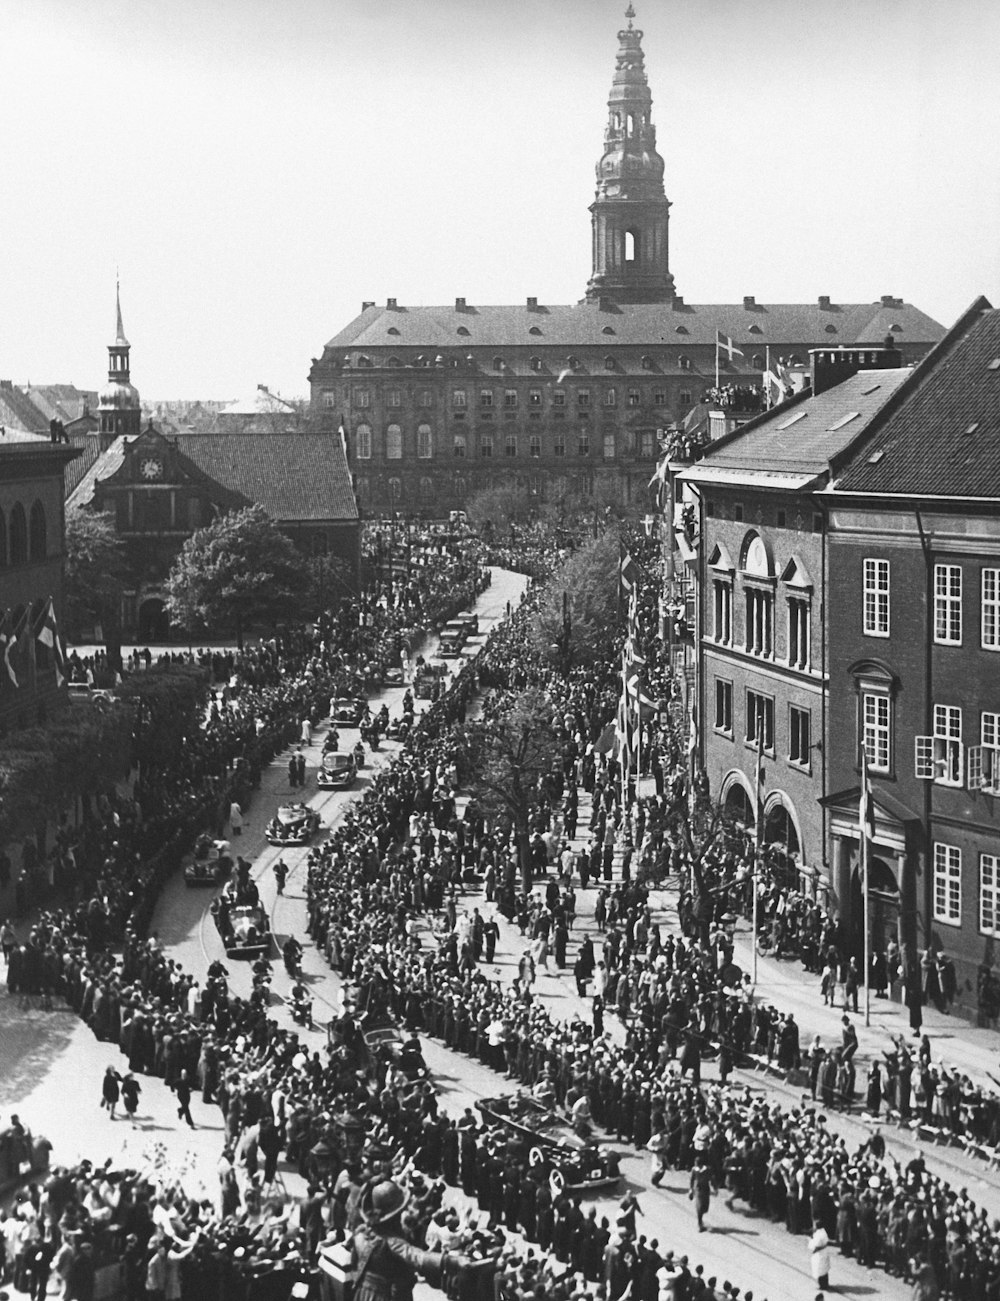 a crowd of people standing on top of a street